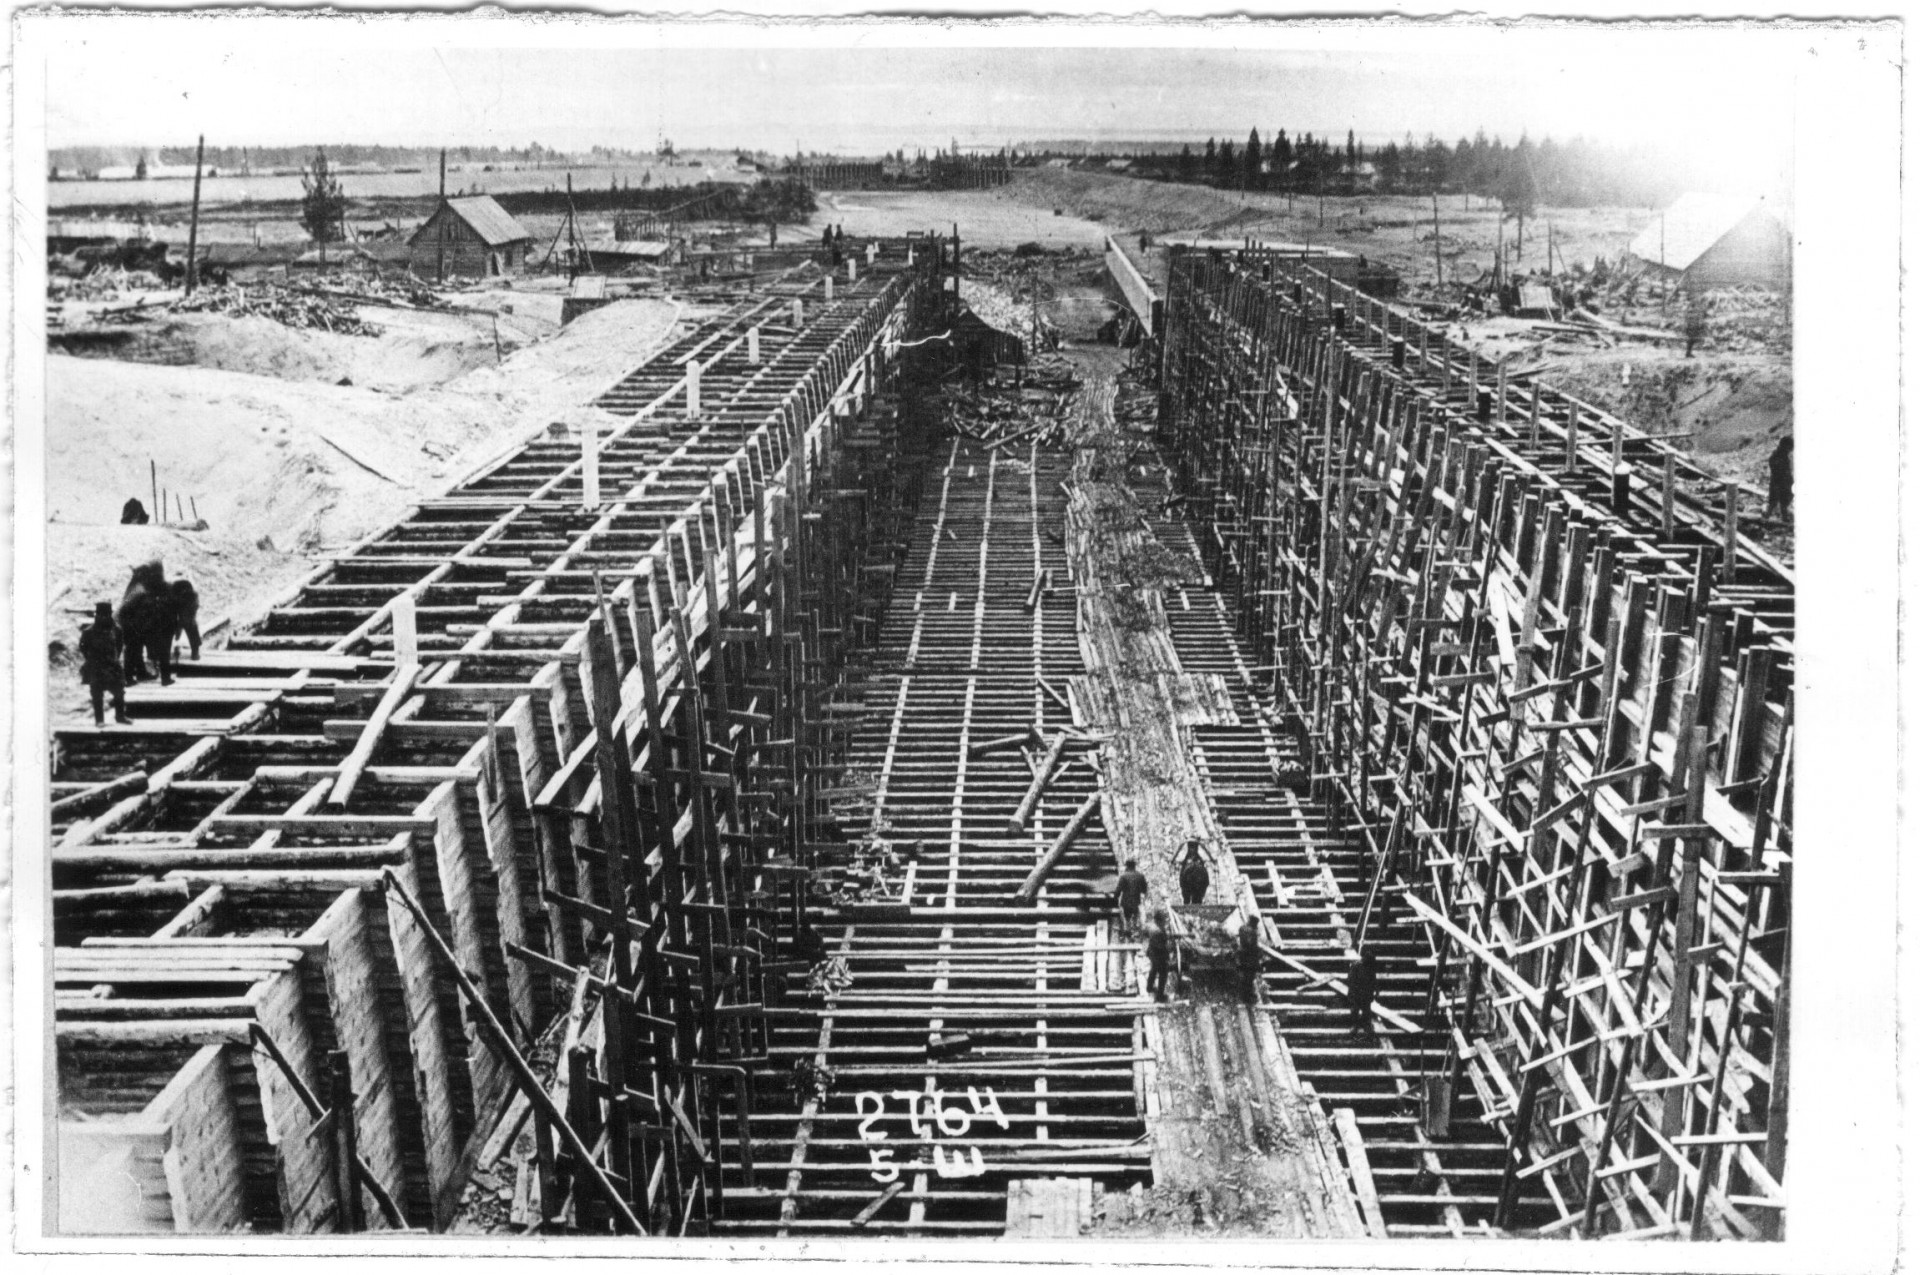 At the construction of the Belomor channel. Photo: Aleksandr Rodchenko